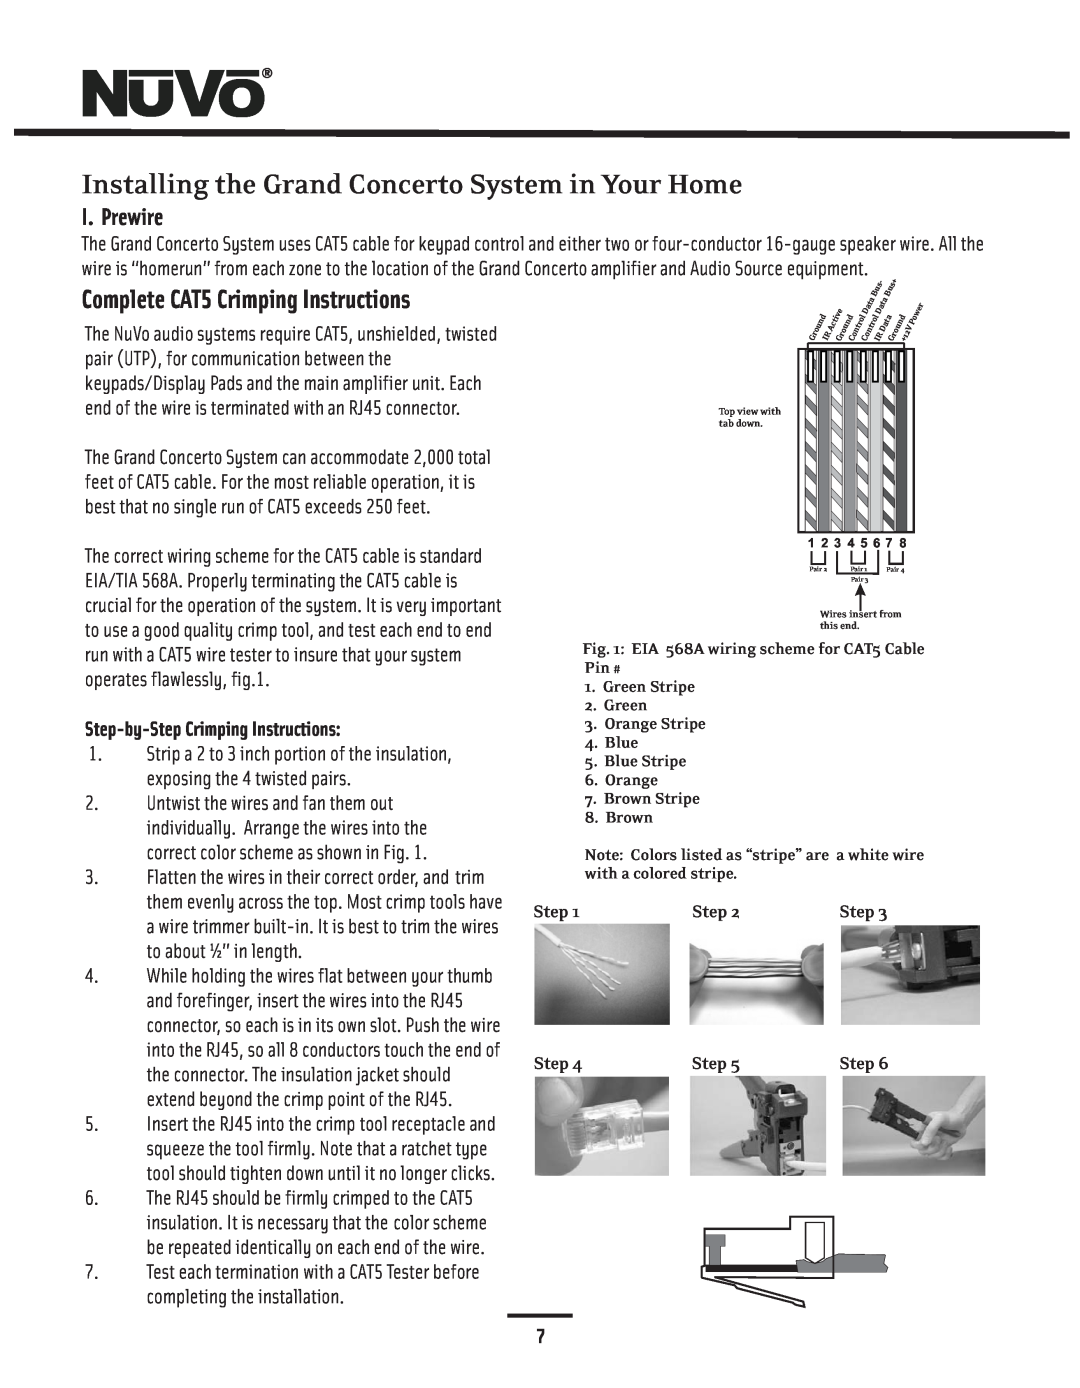 Nuvo NV-I8GMS, NV-I8GXS Installing the Grand Concerto System in Your Home, I. Prewire, Step-by-StepCrimping Instructions 